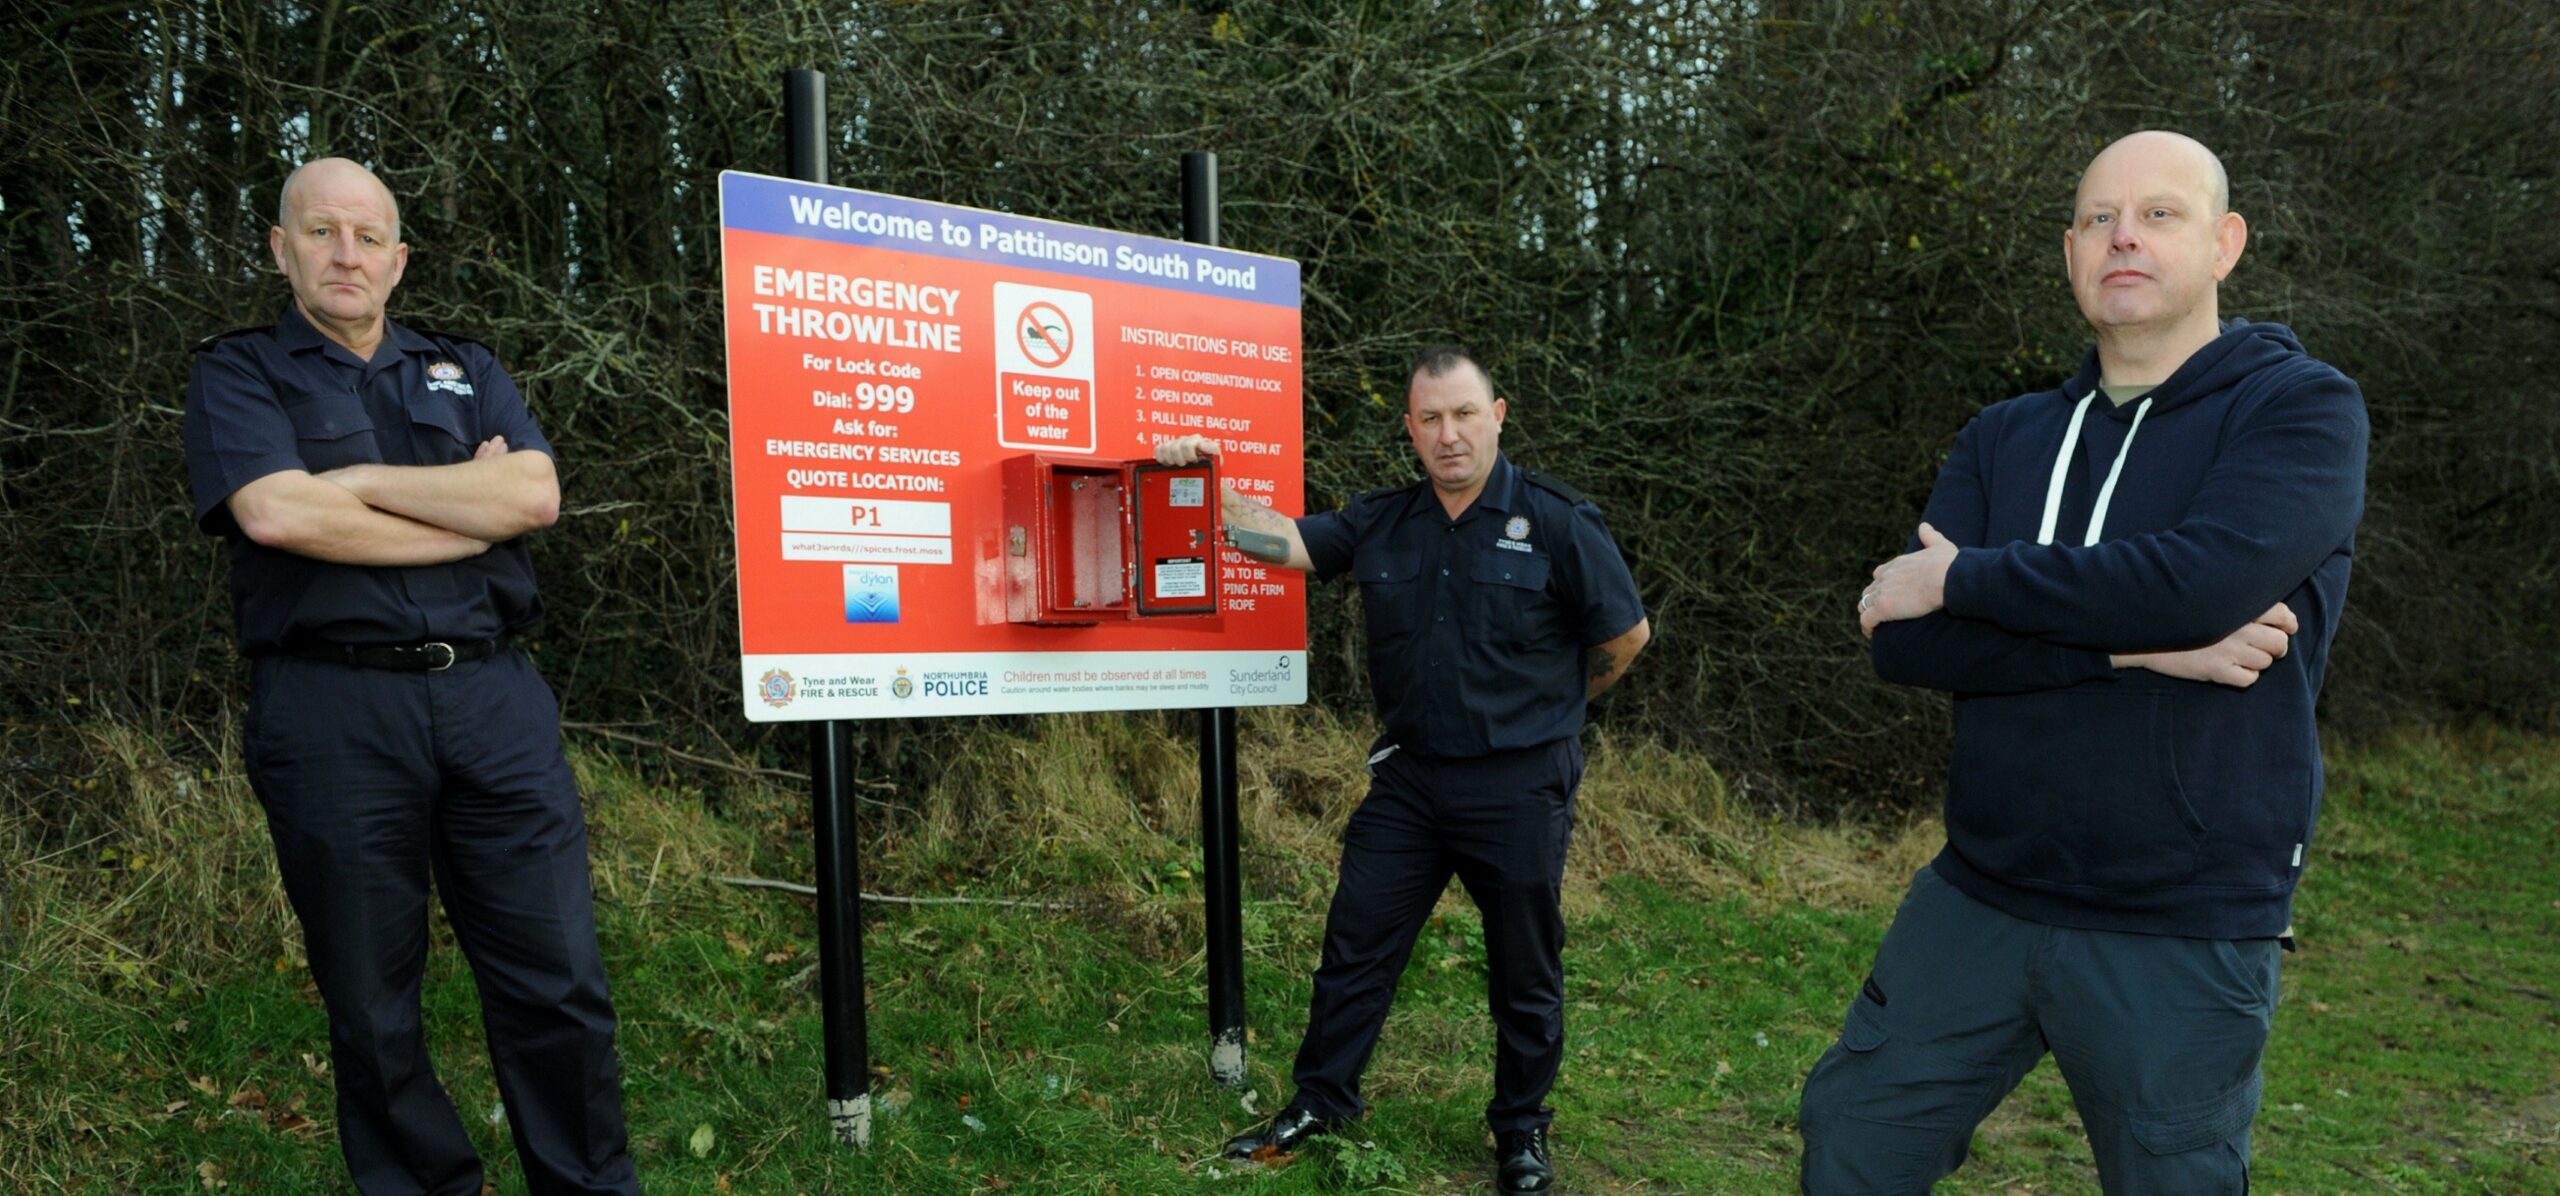 L to R - Mark Hayes, Prevention and Education Station Manager with Tommy Richardson, Prevention and Education Firefighter for @twfrs and Councillor Tony Taylor, Washington East councillor and Chair of Tyne and Wear Fire and Rescue Authority at the vandalised throwline board at Pattinson South Pond in Washington.